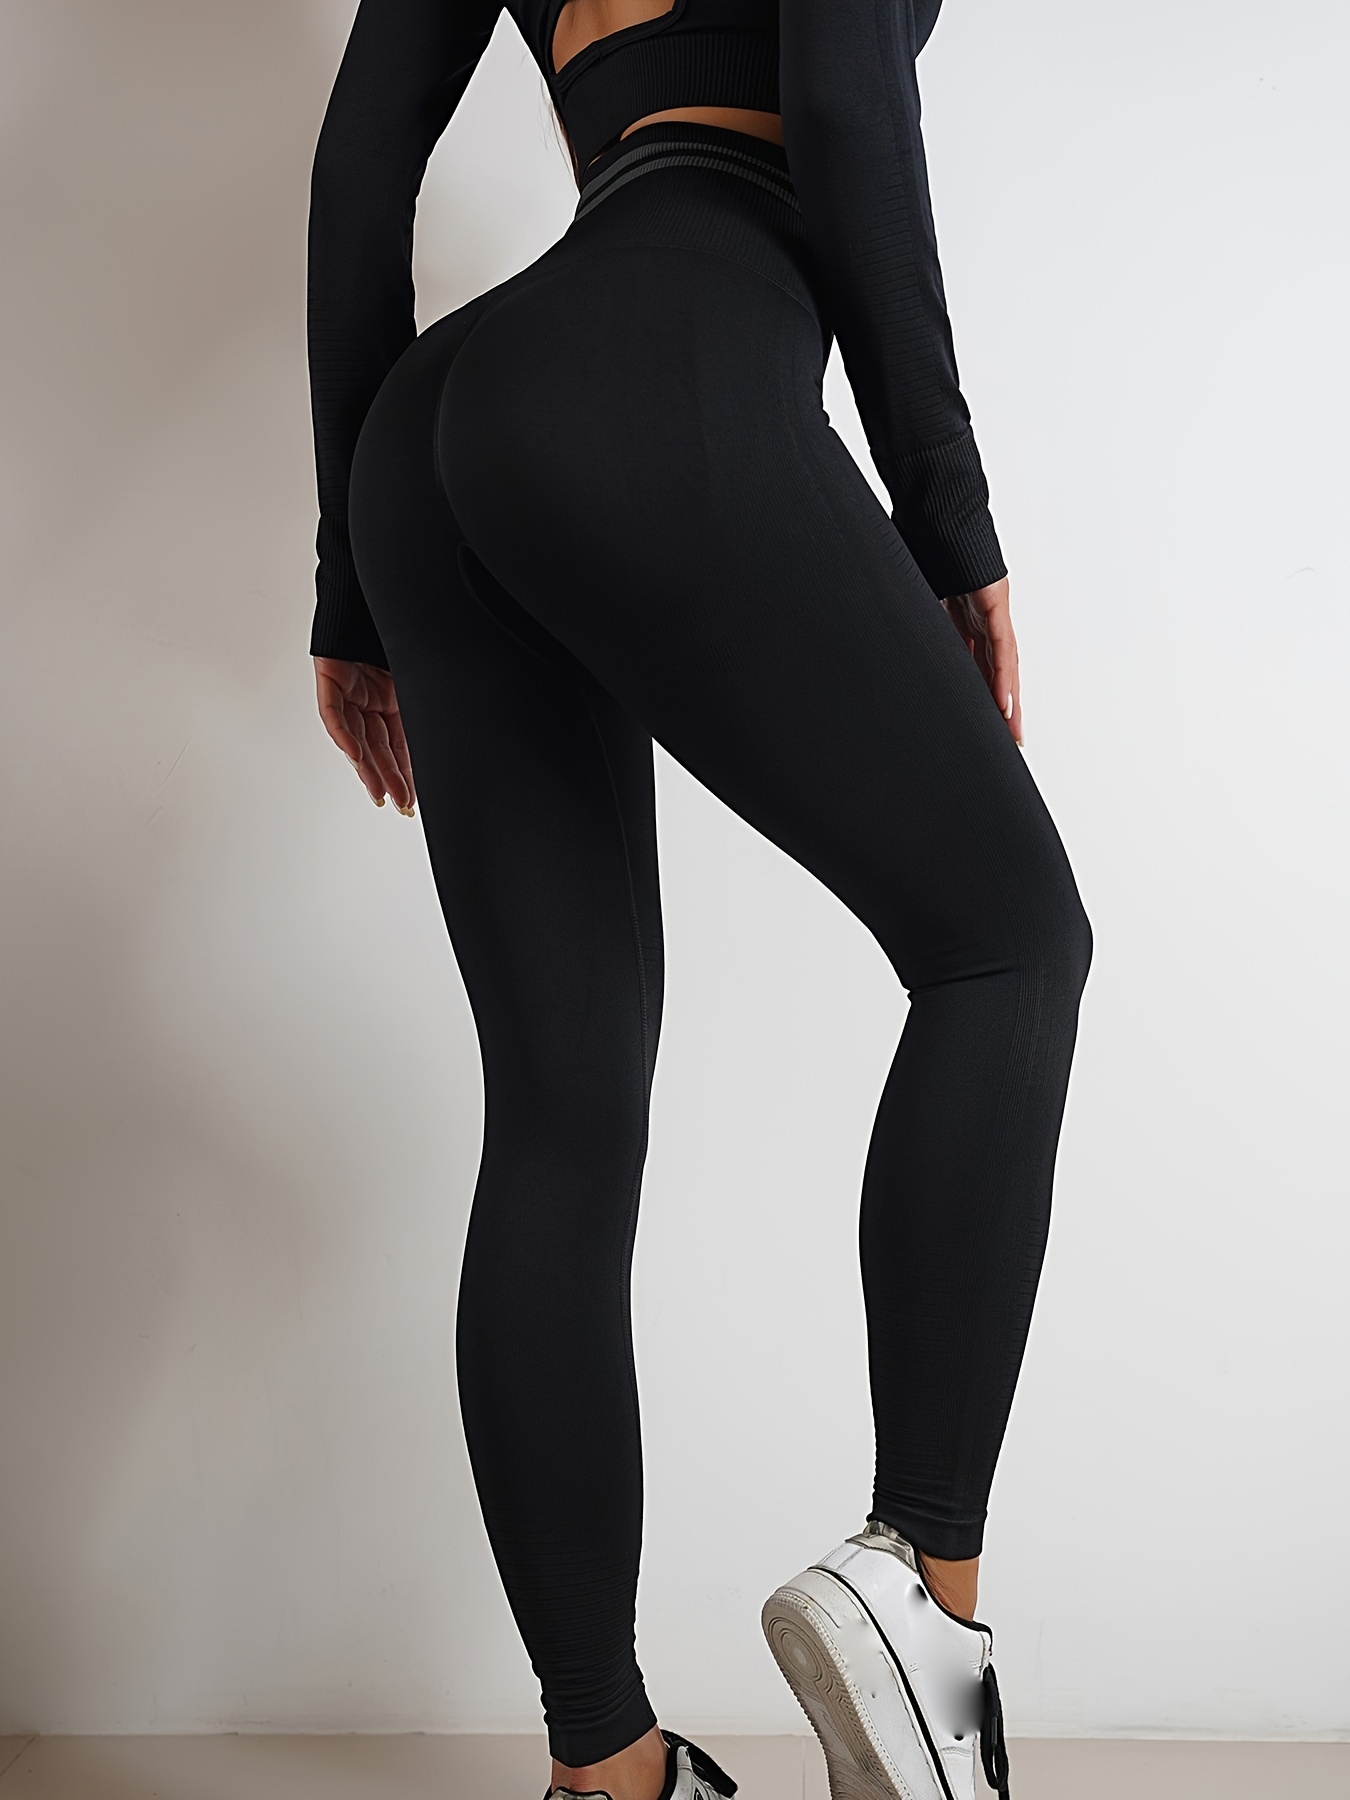 Don't Even Try Stretchable Super Skinny Butt Lifting Leggings - TIA Trends  - Shop Today